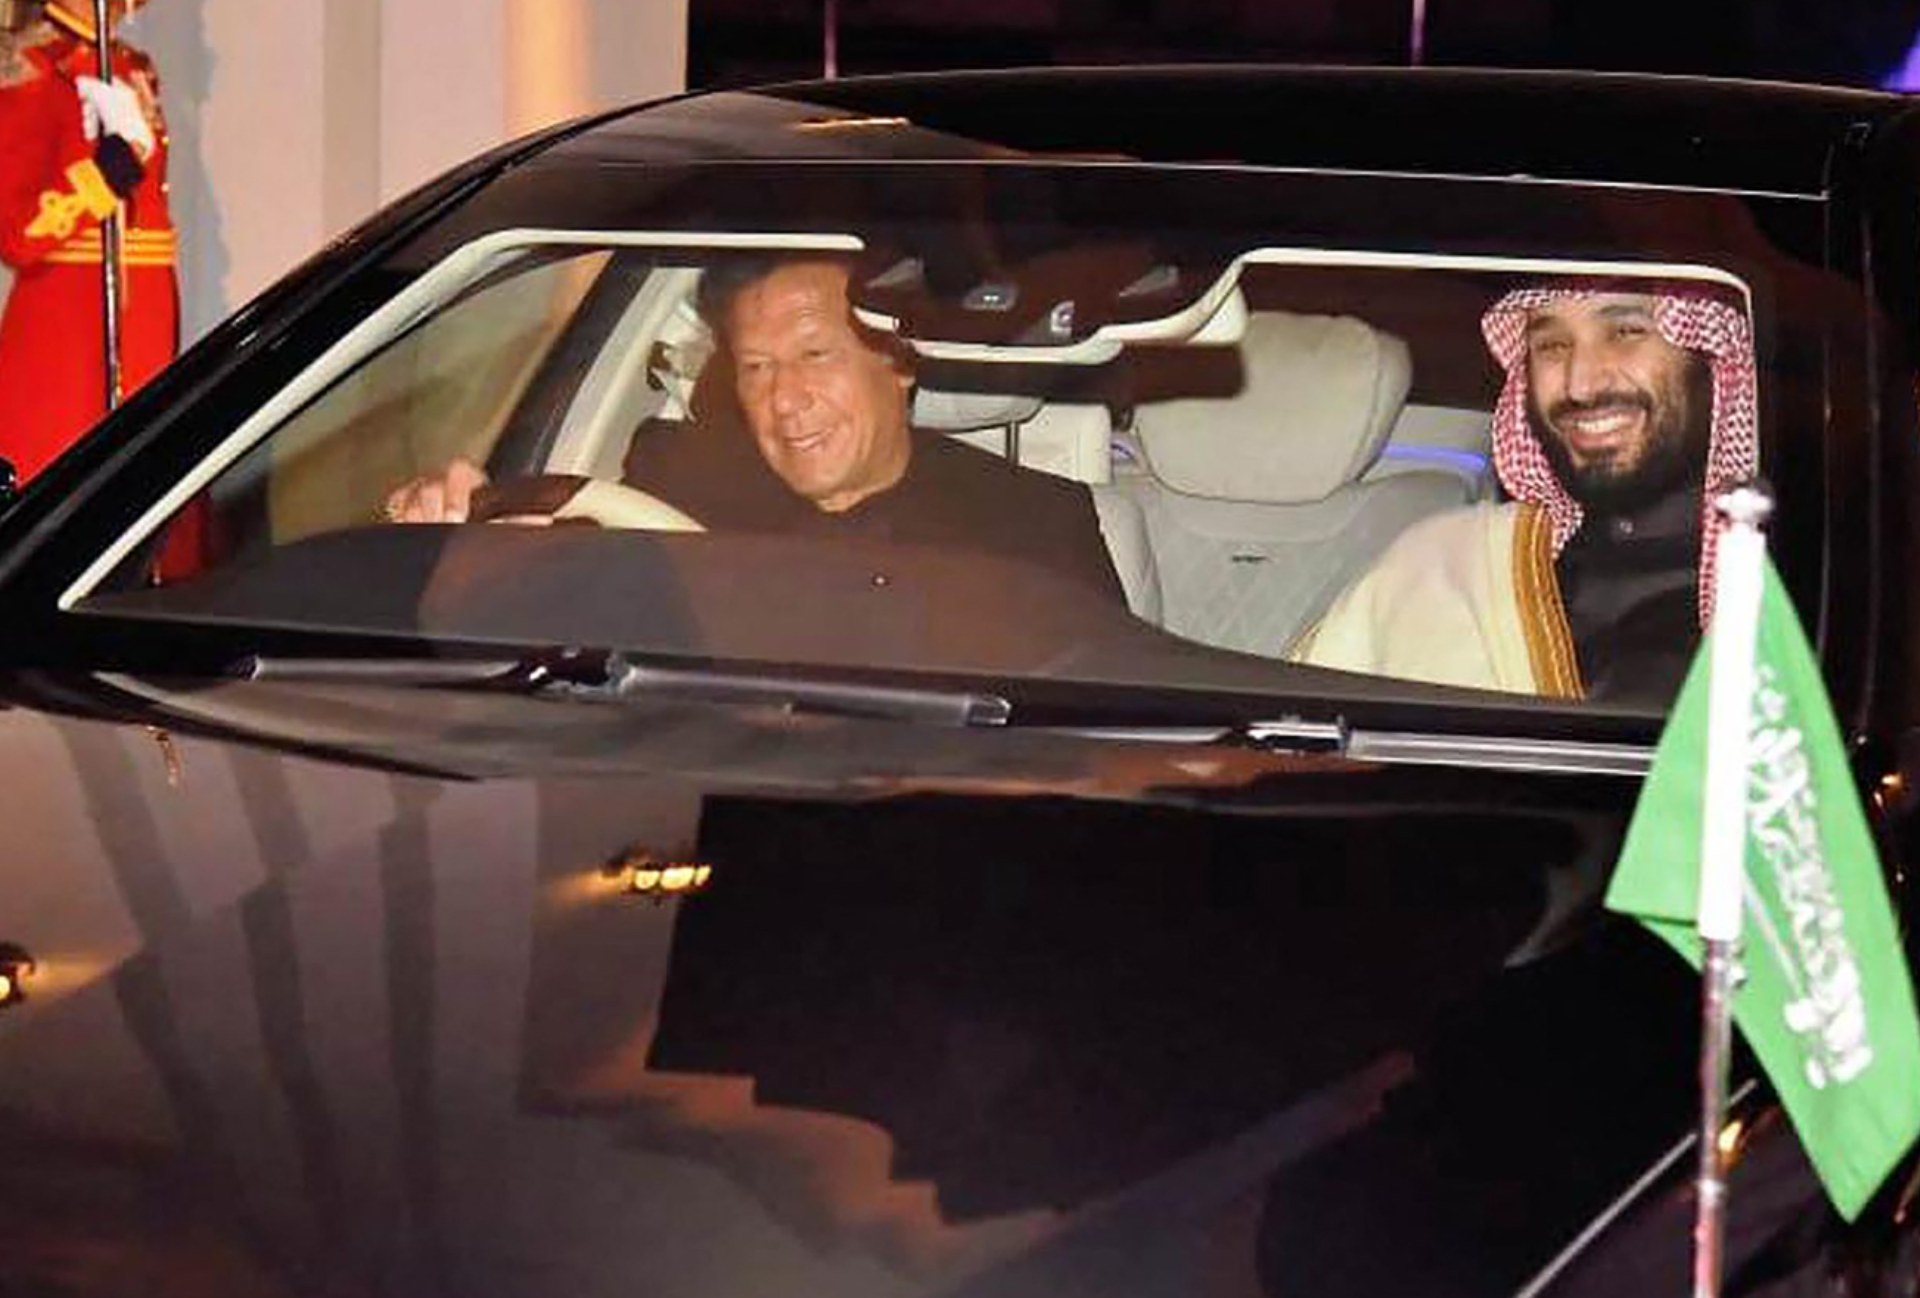 Imran Khan drives Mohammed bin Salman after the Saudi Crown Prince's arrival in Pakistan in February 2019 (AFP)